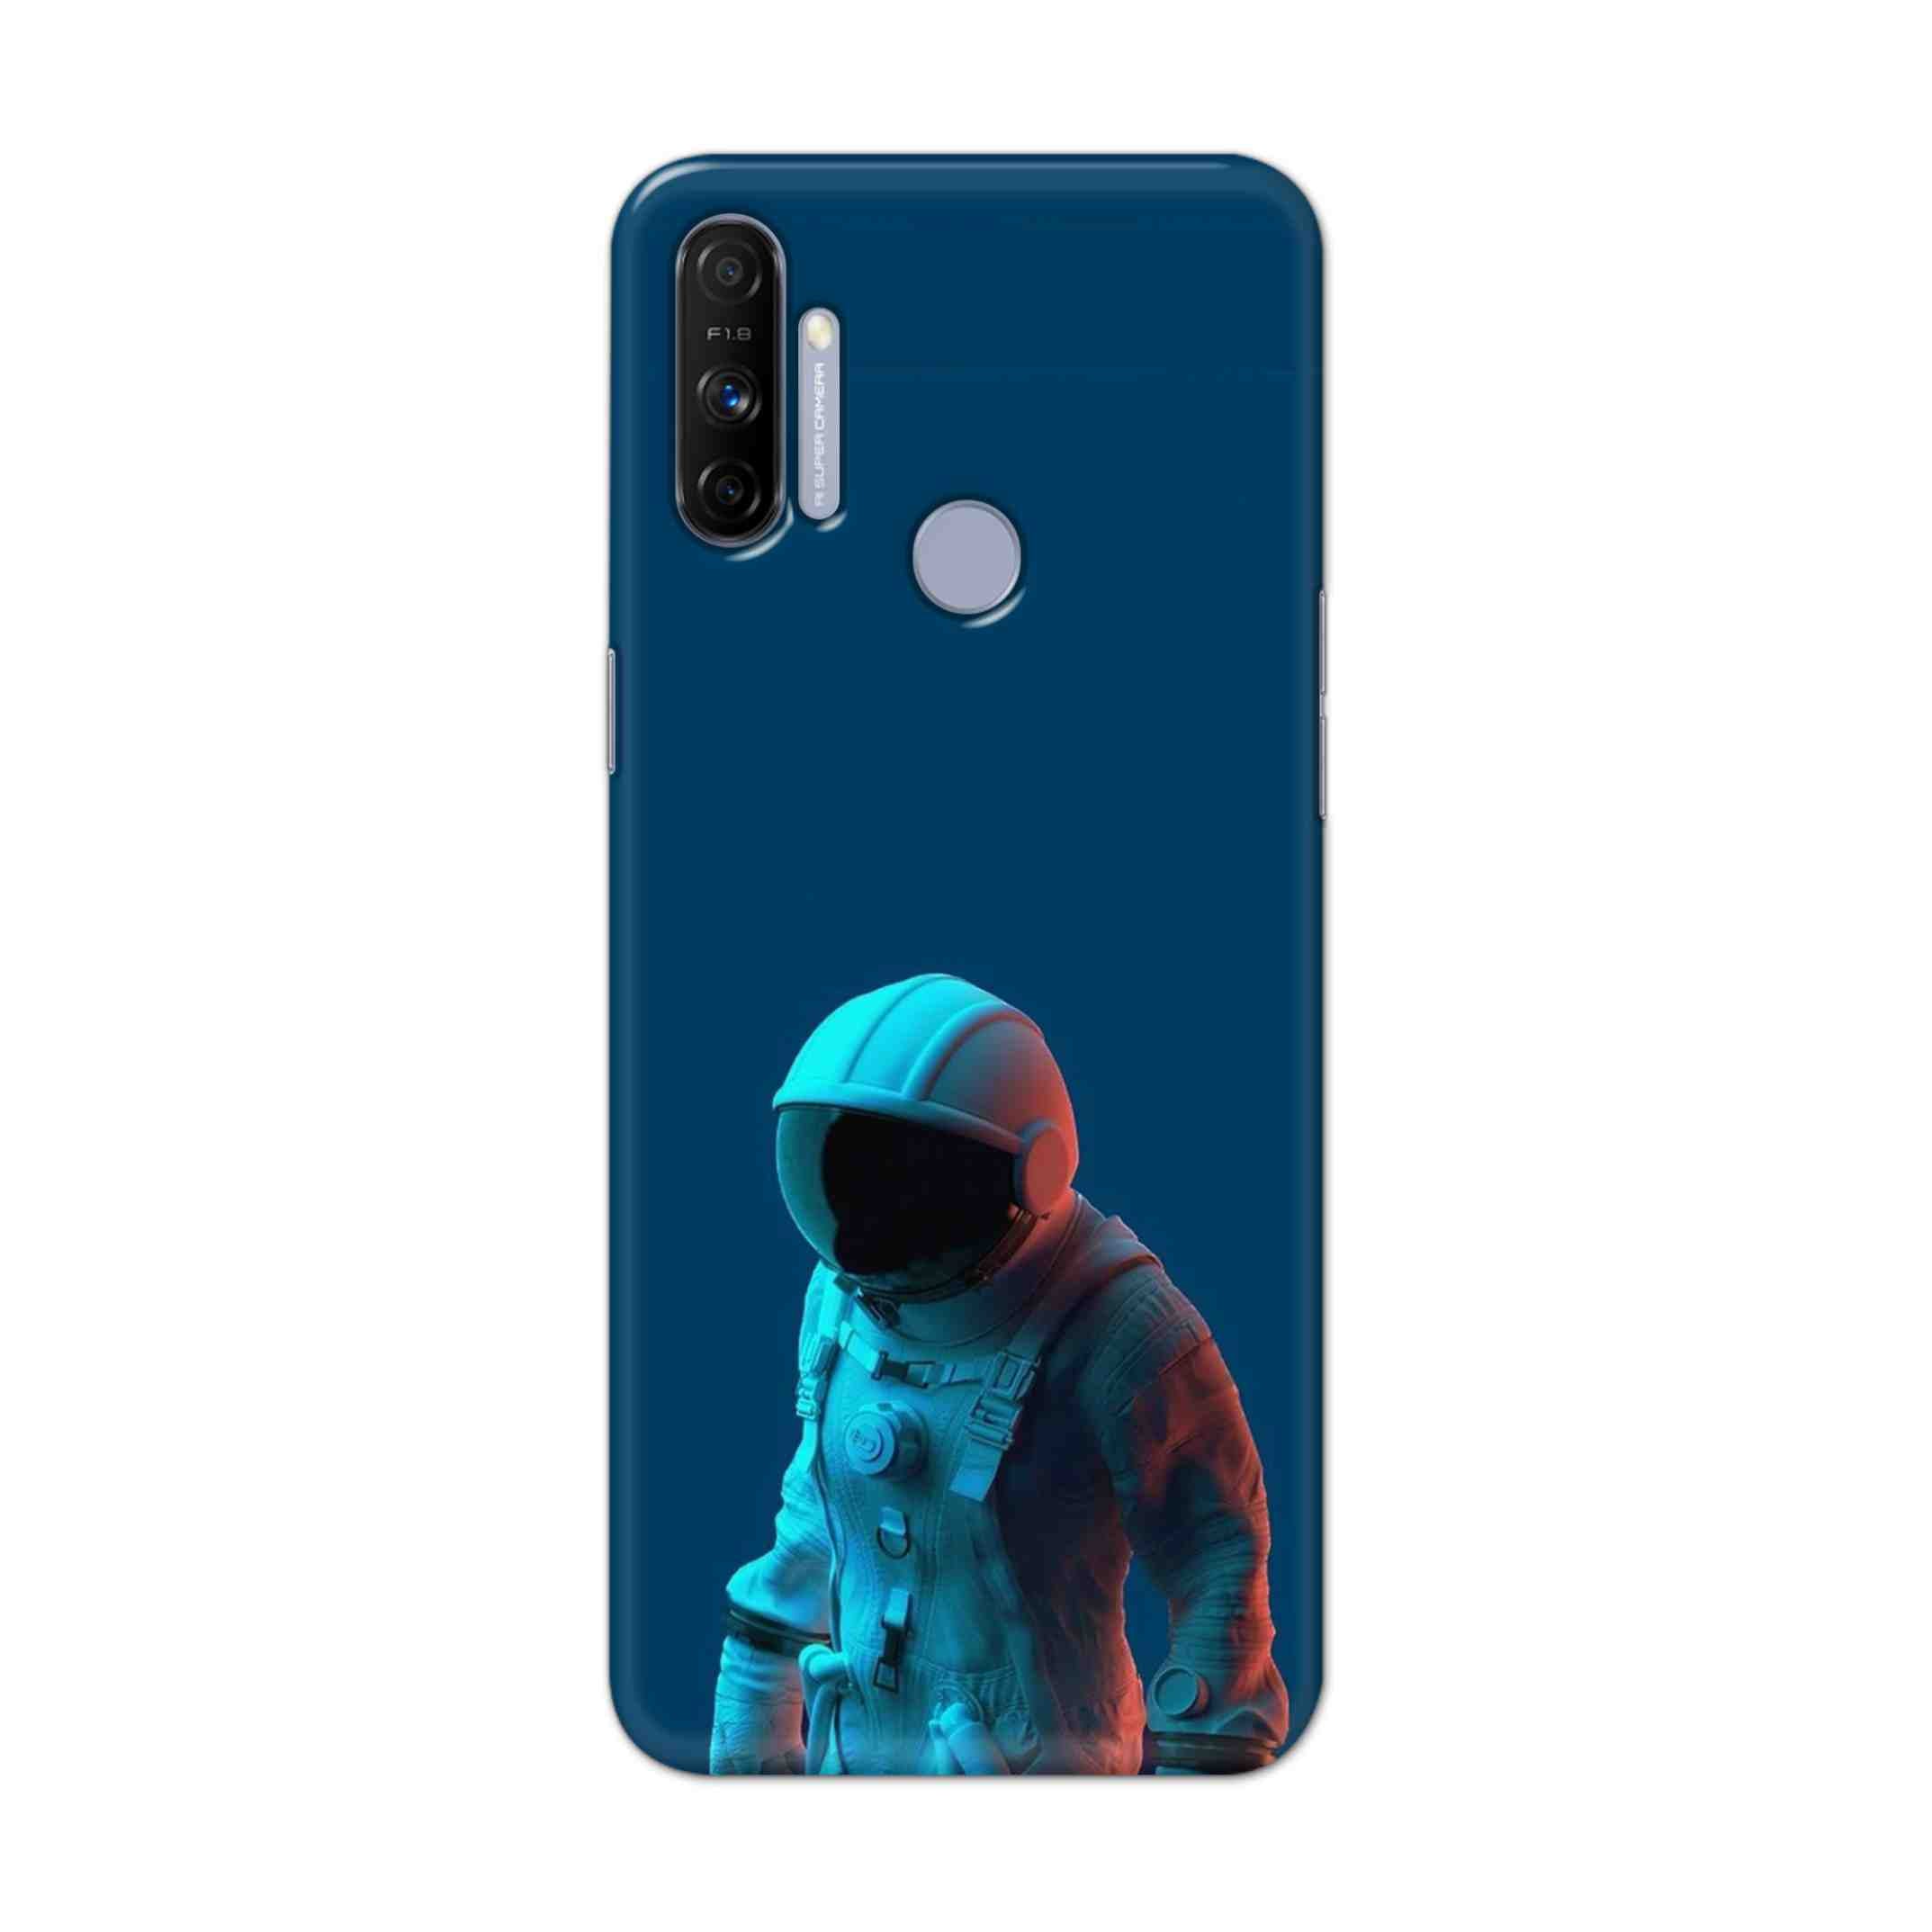 Buy Blue Astronaut Hard Back Mobile Phone Case Cover For Realme Narzo 20A Online